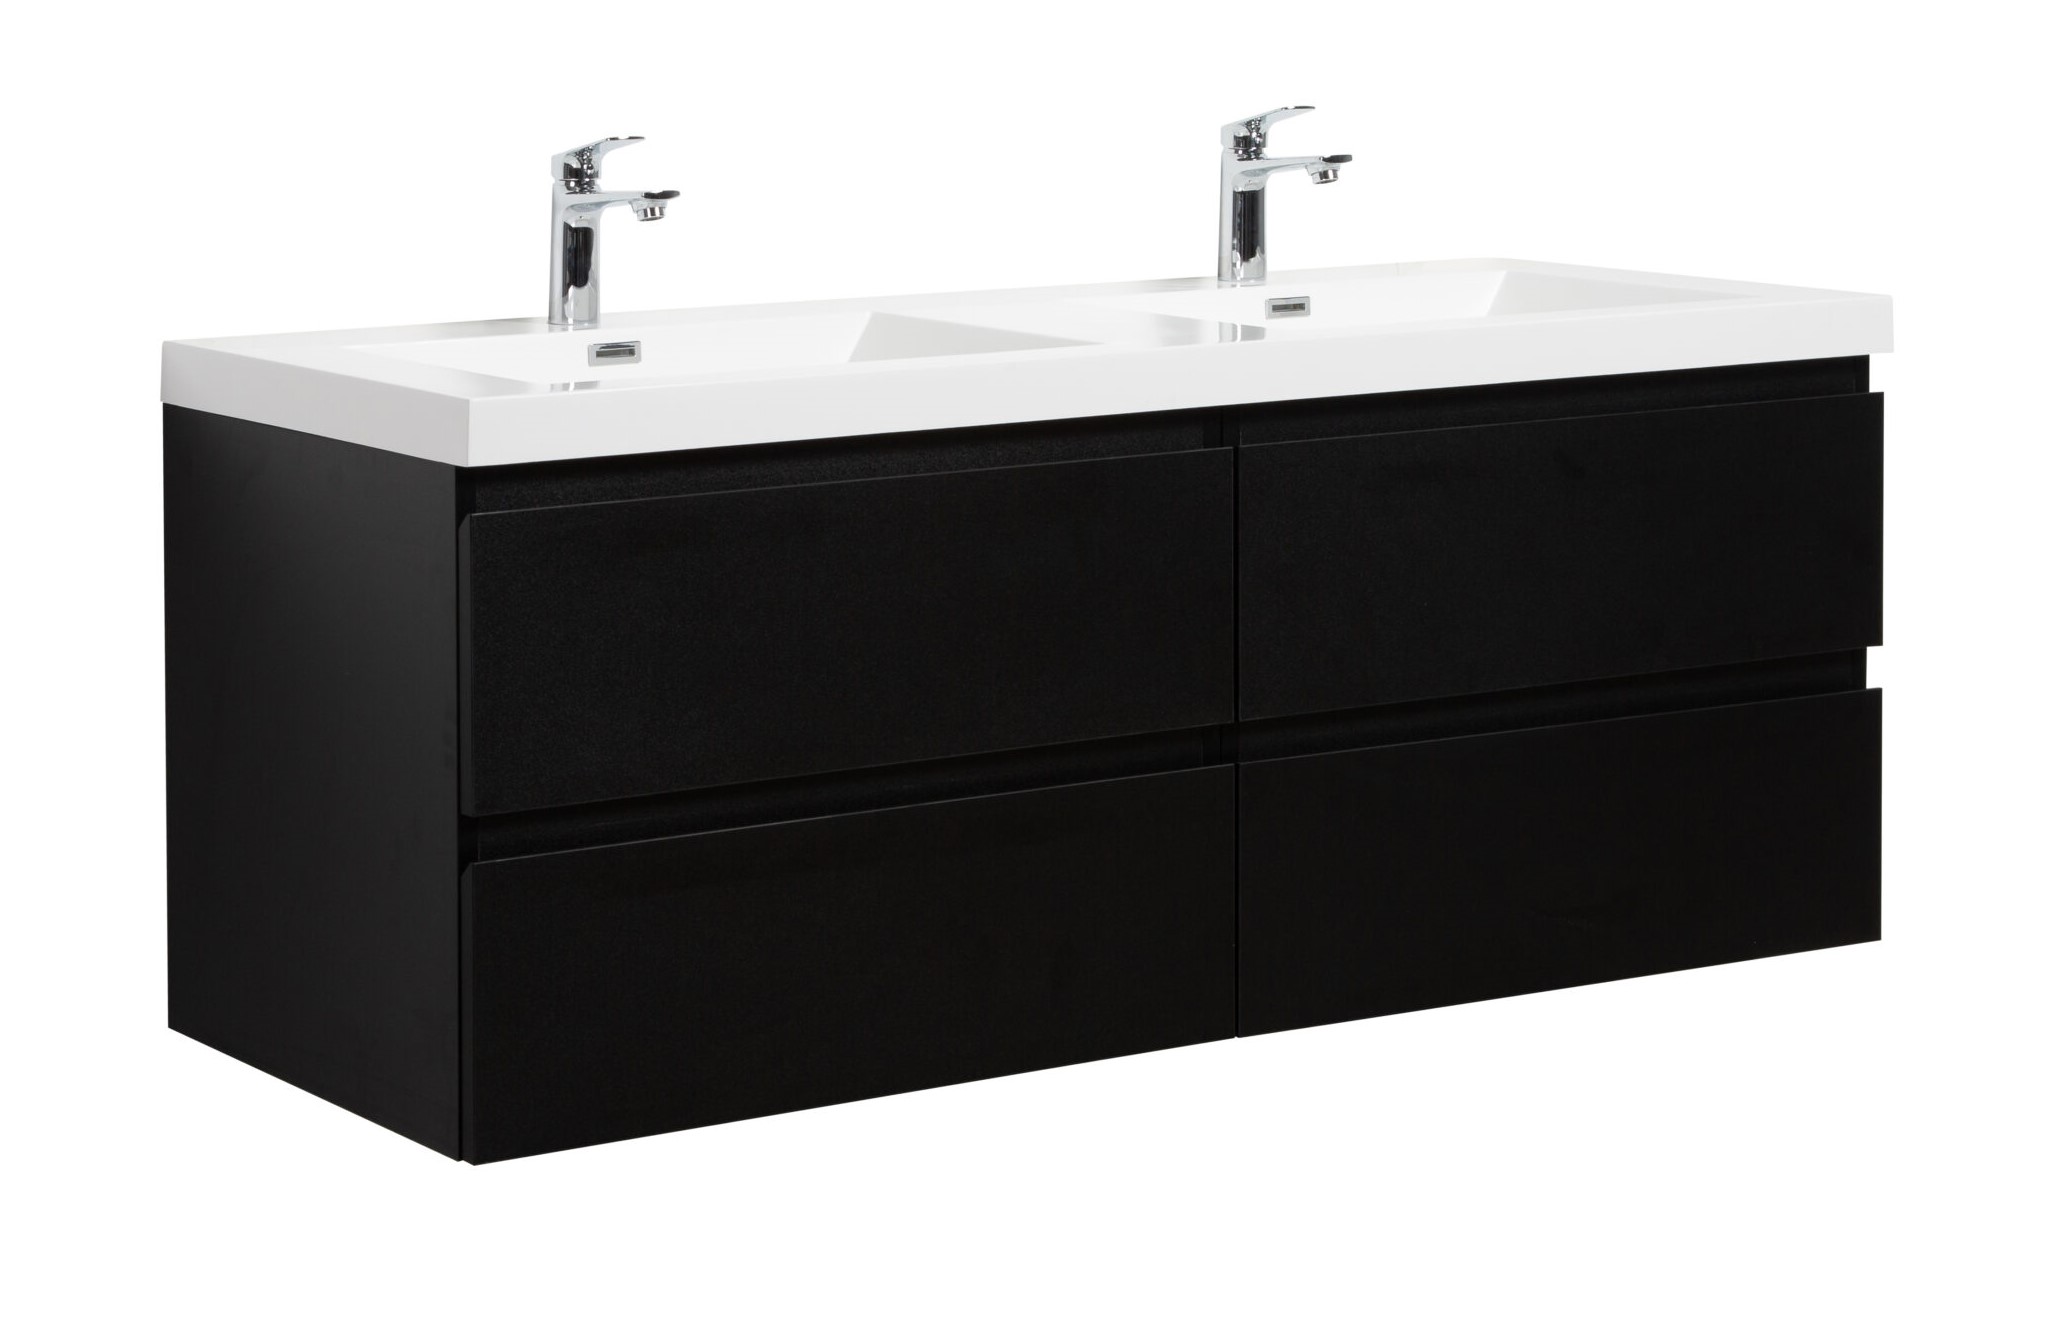 Aurora 60" Matte Midnight Black Wall Hung Double Sink Bathroom Vanity with White Acrylic Countertop